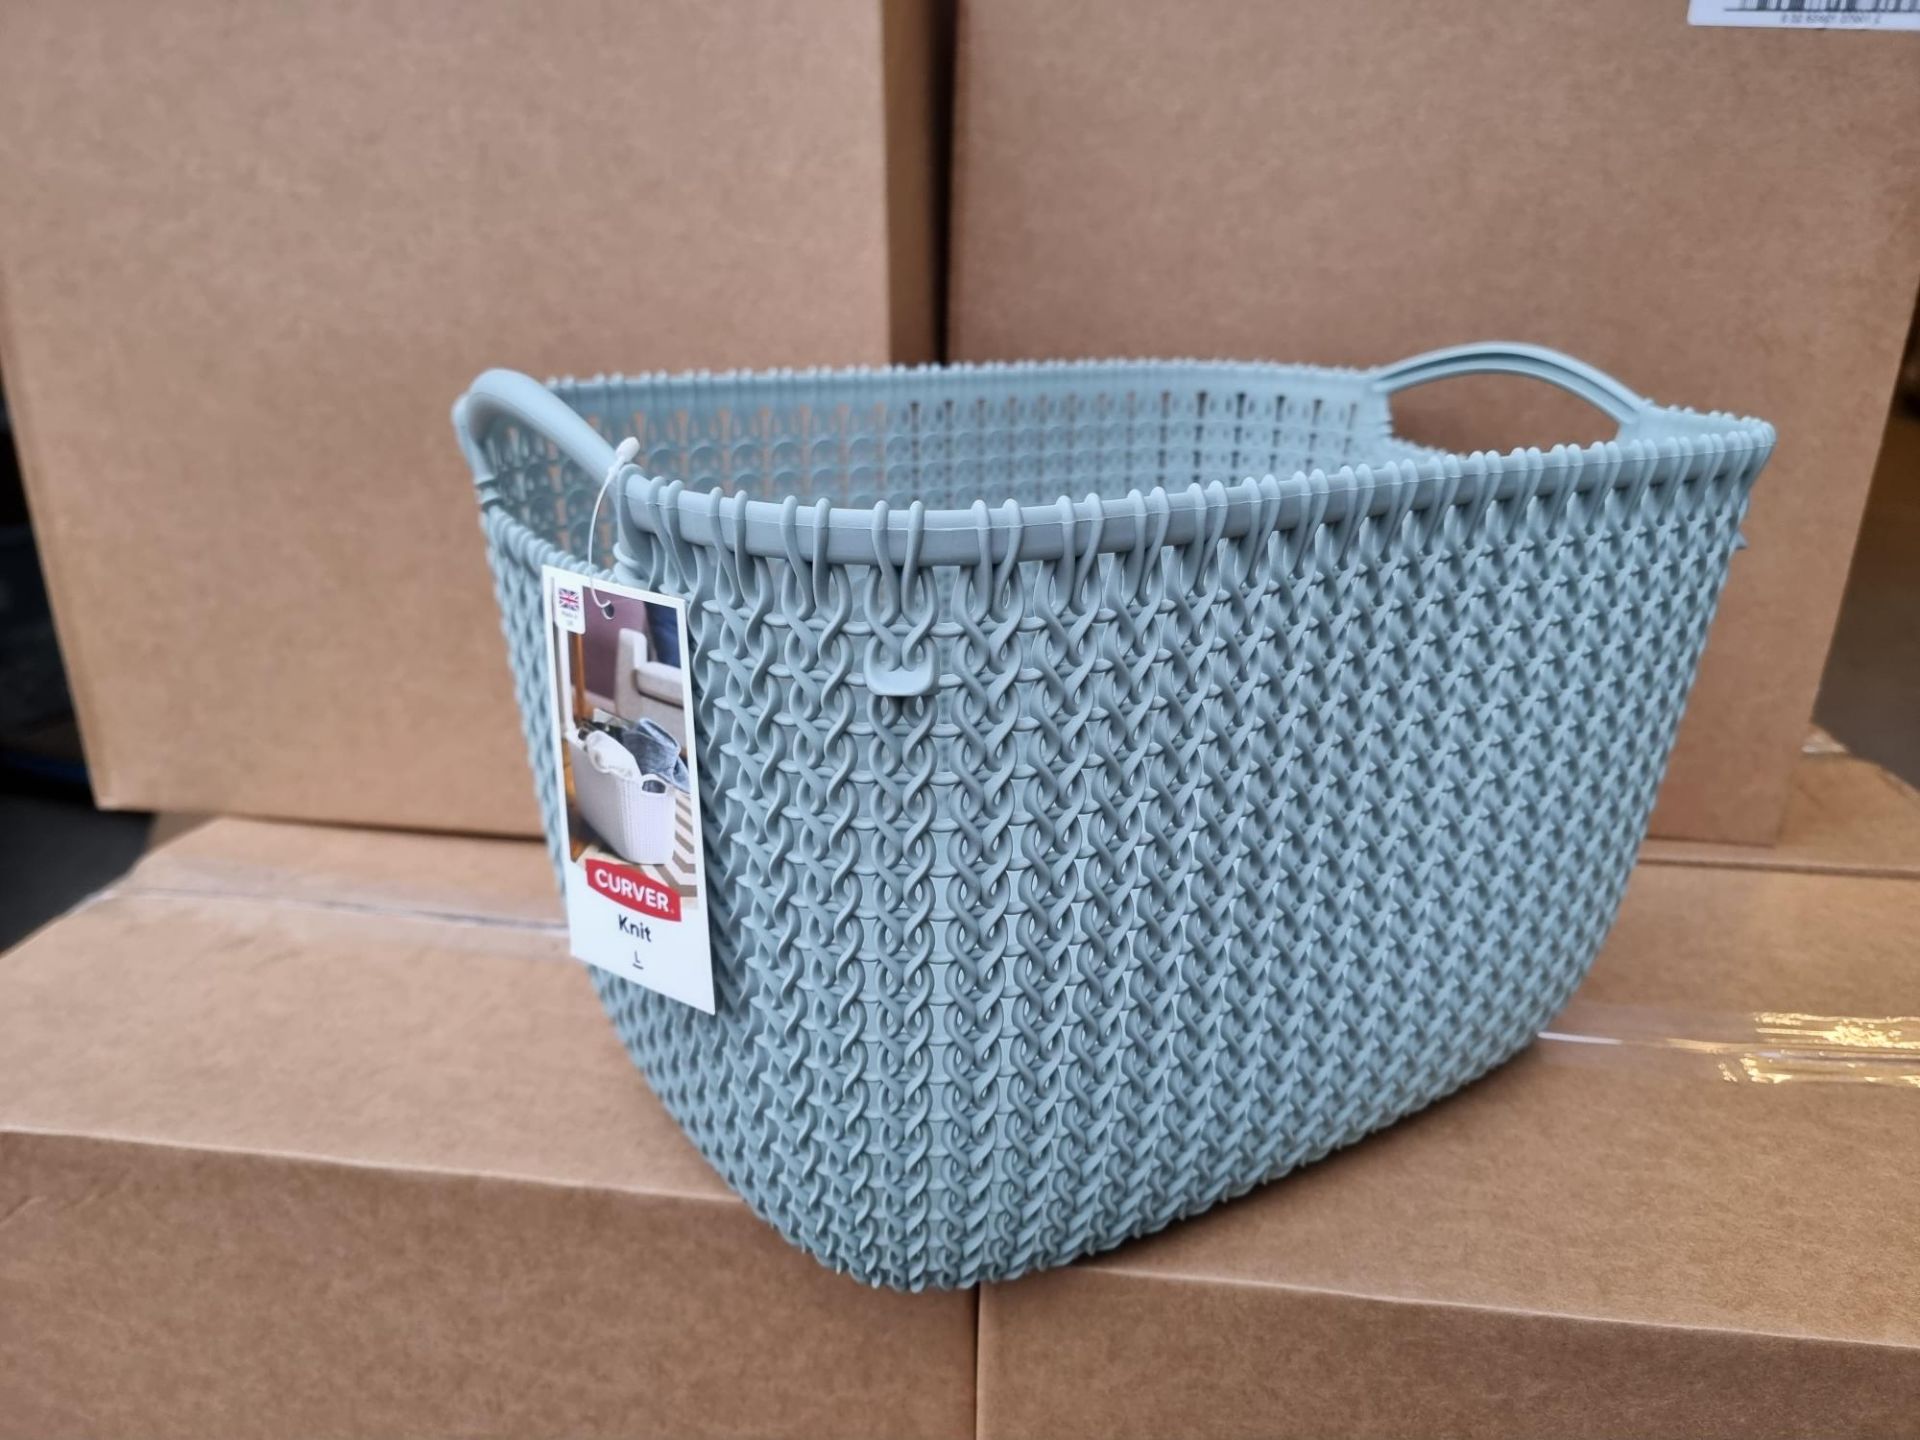 PALLET TO CONTAIN 100 X NEW PACKAGED Curver Knit Rectangular Storage Basket - 19 Litres, Misty Blue.